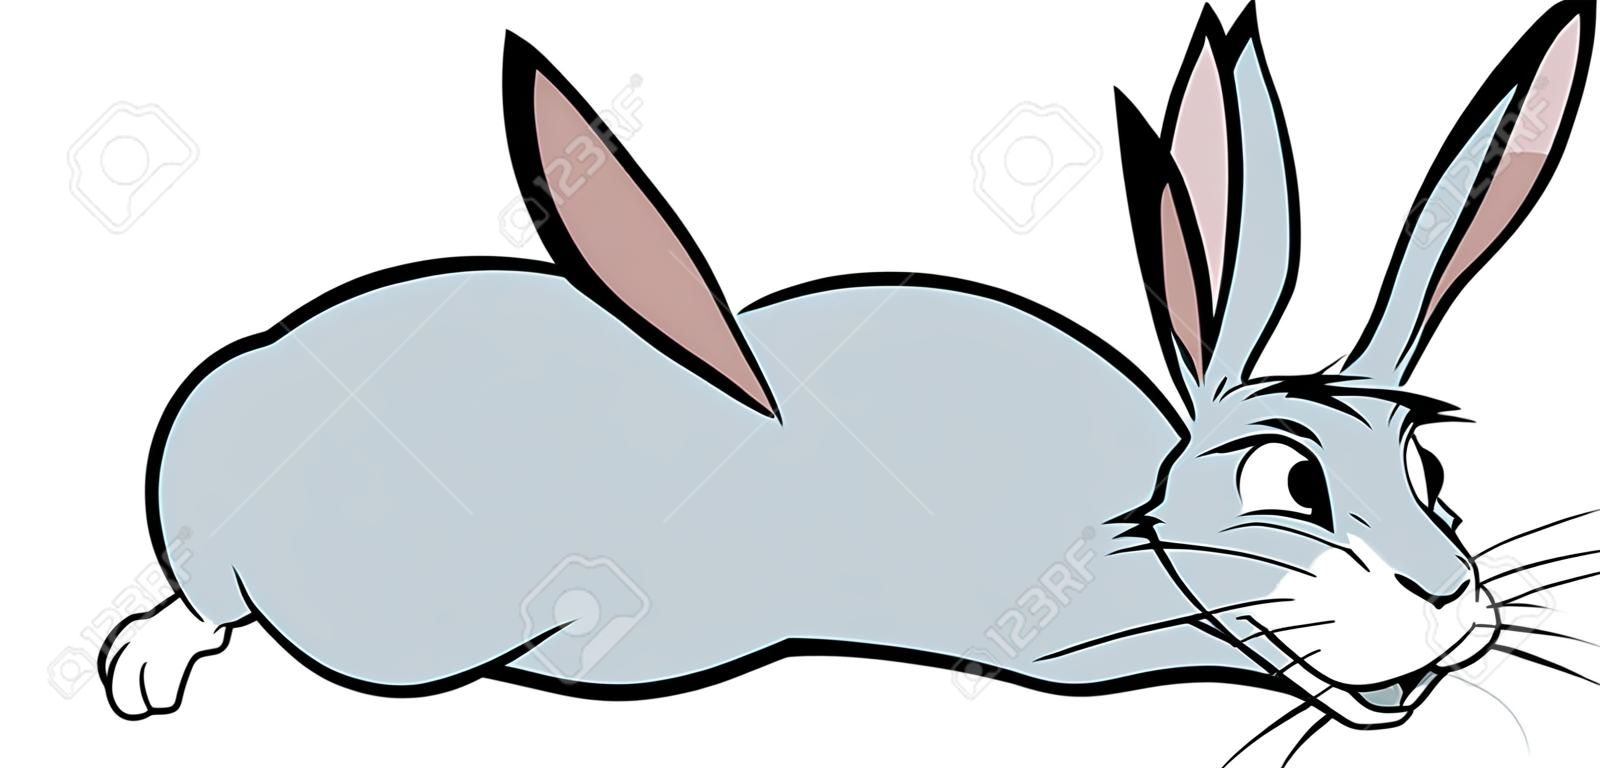 cartoon vector illustration of an angry rabbit leaping